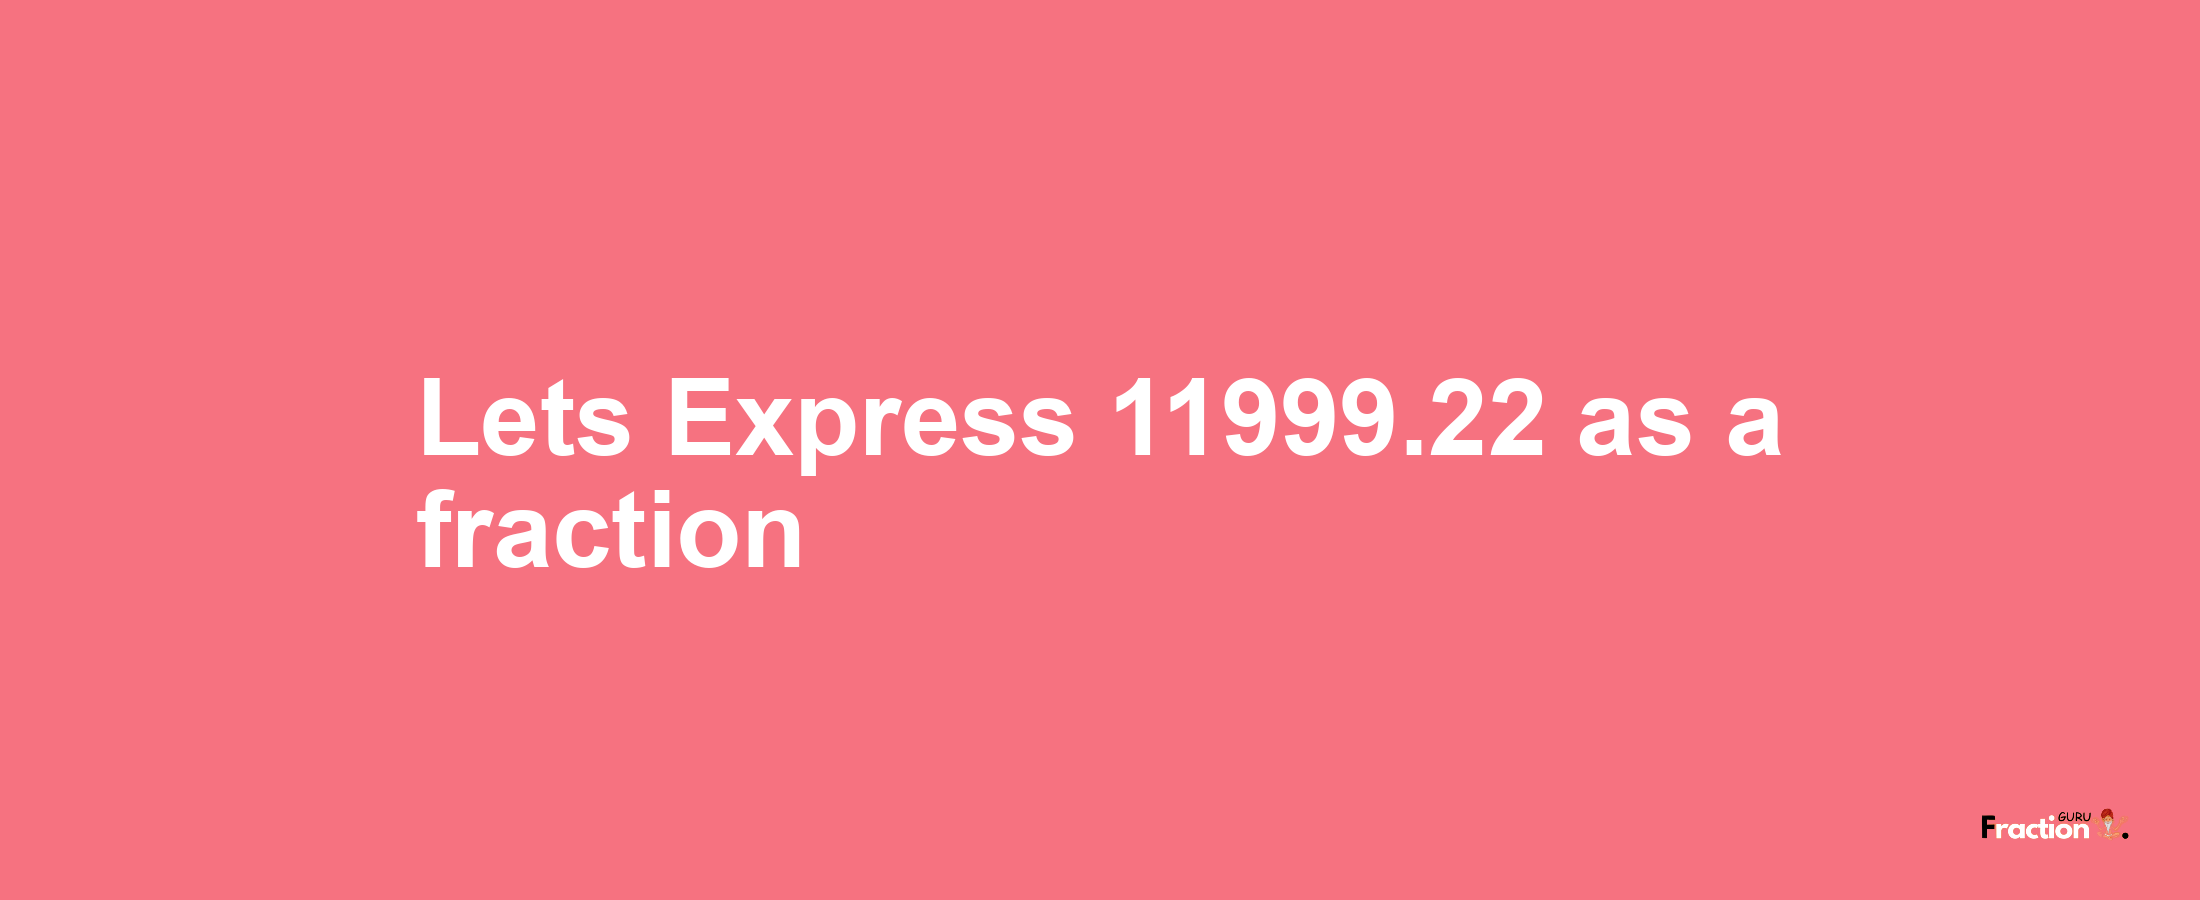 Lets Express 11999.22 as afraction